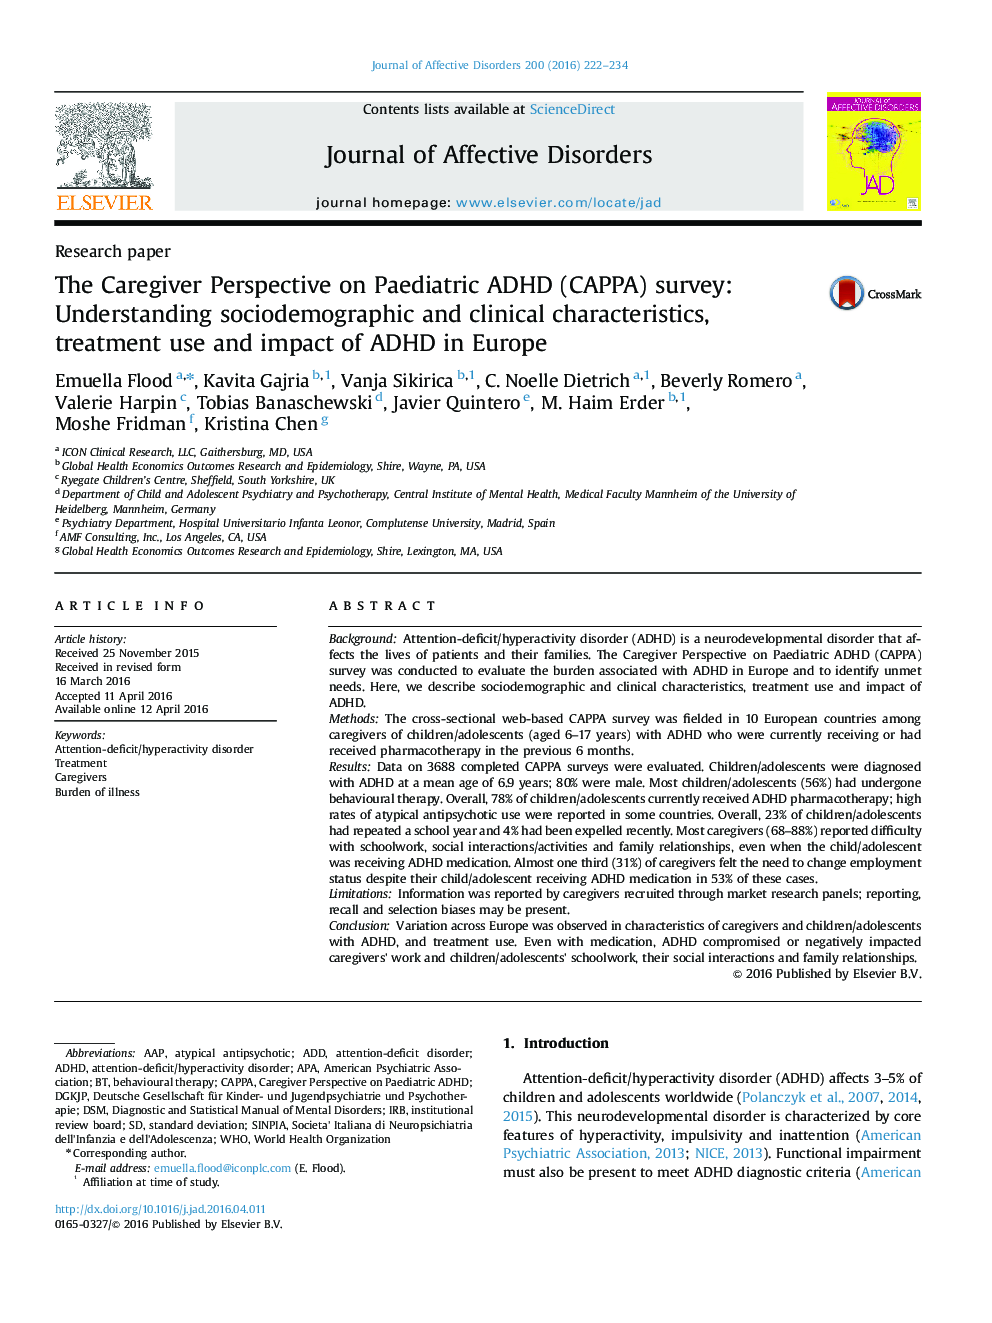 The Caregiver Perspective on Paediatric ADHD (CAPPA) survey: Understanding sociodemographic and clinical characteristics, treatment use and impact of ADHD in Europe